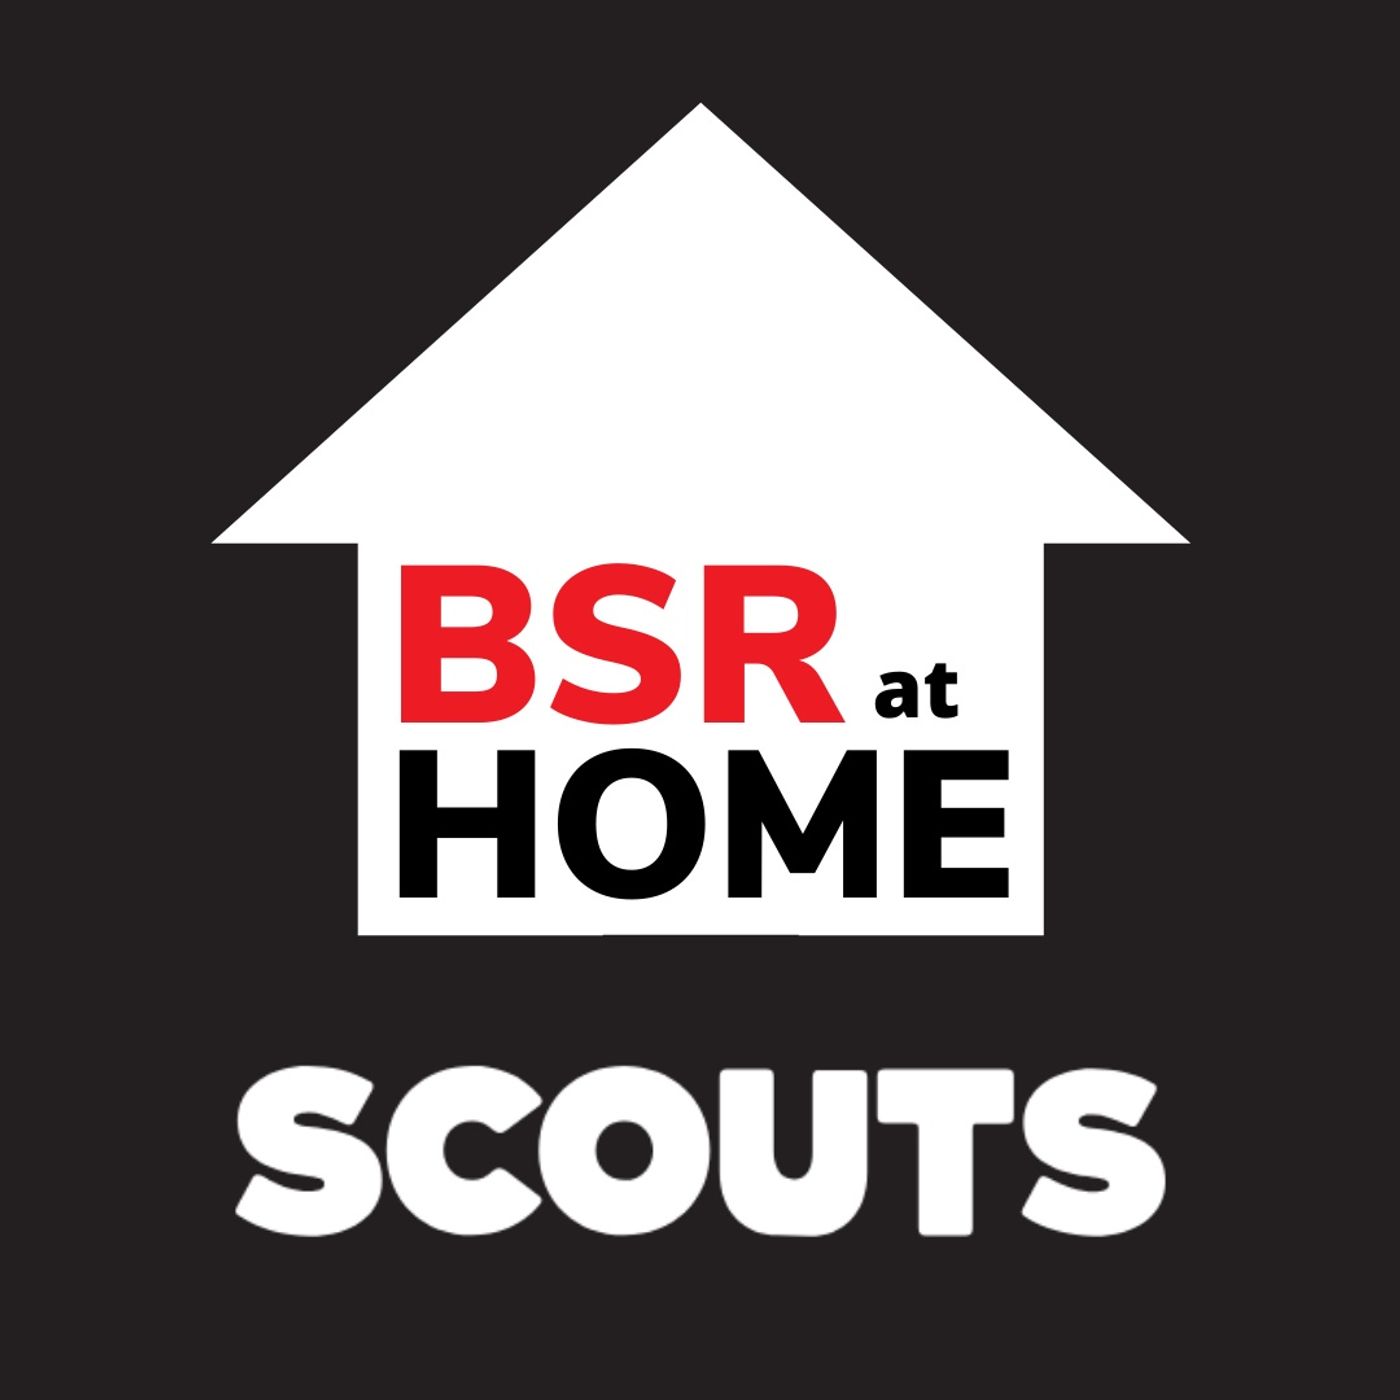 BSR at Home Scouts